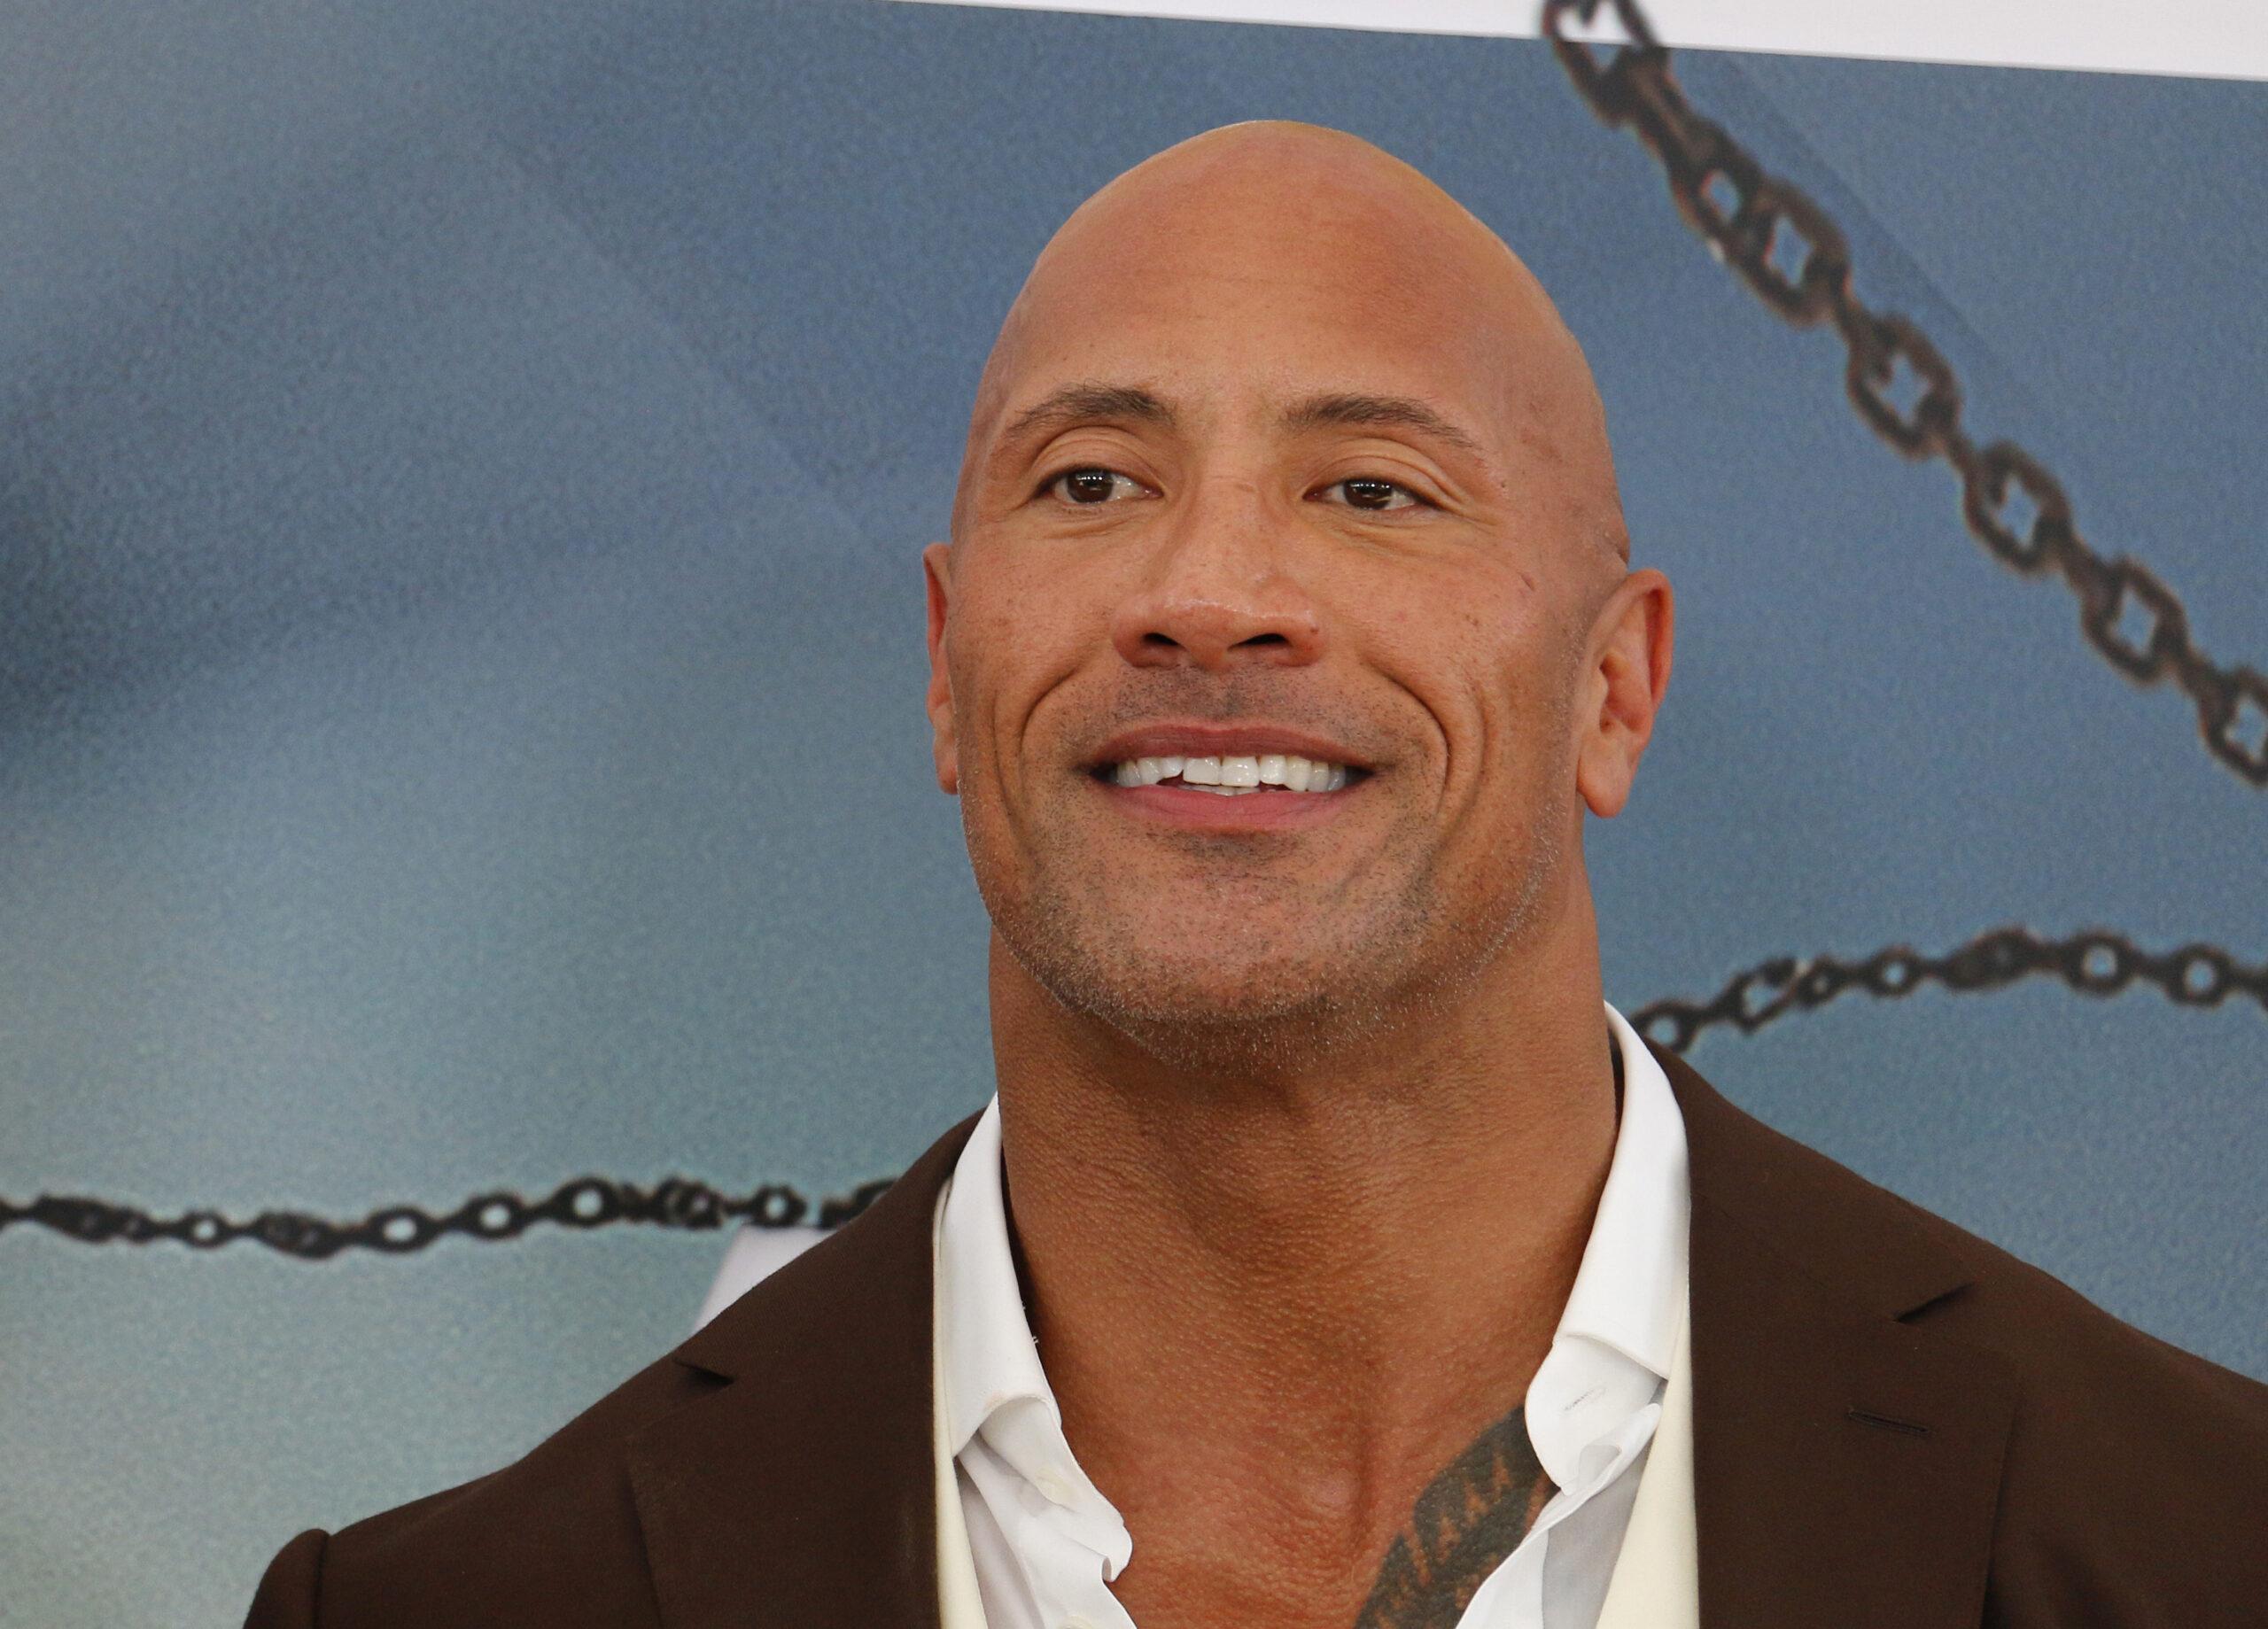 Dwayne 'The Rock' Johnson World premiere of 'Fast & Furious Presents: Hobbs & Shaw'